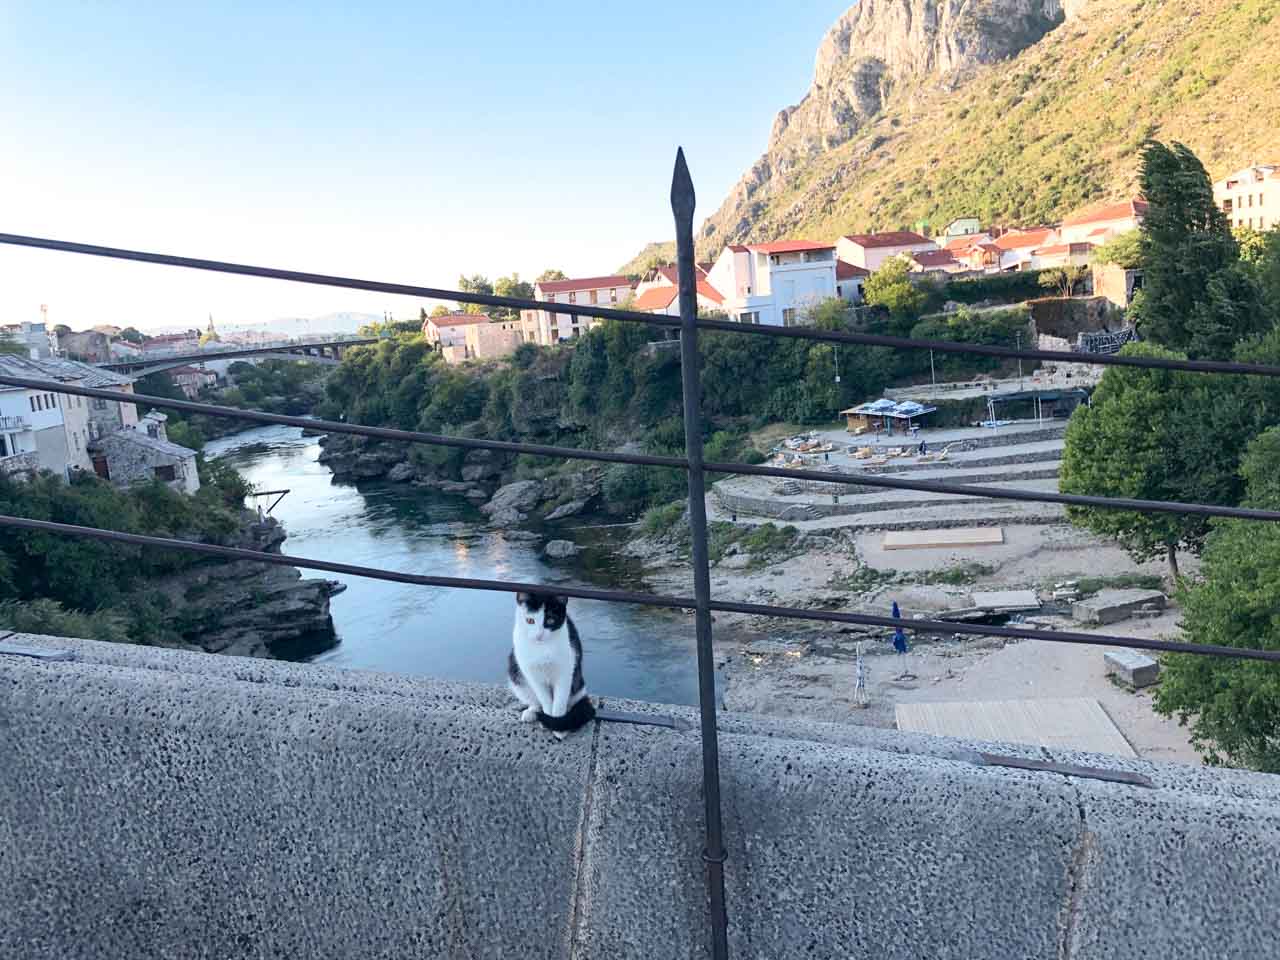 A small black and white kitten sitting on the ledge of the Old Bridge (Stari Most) in Mostar